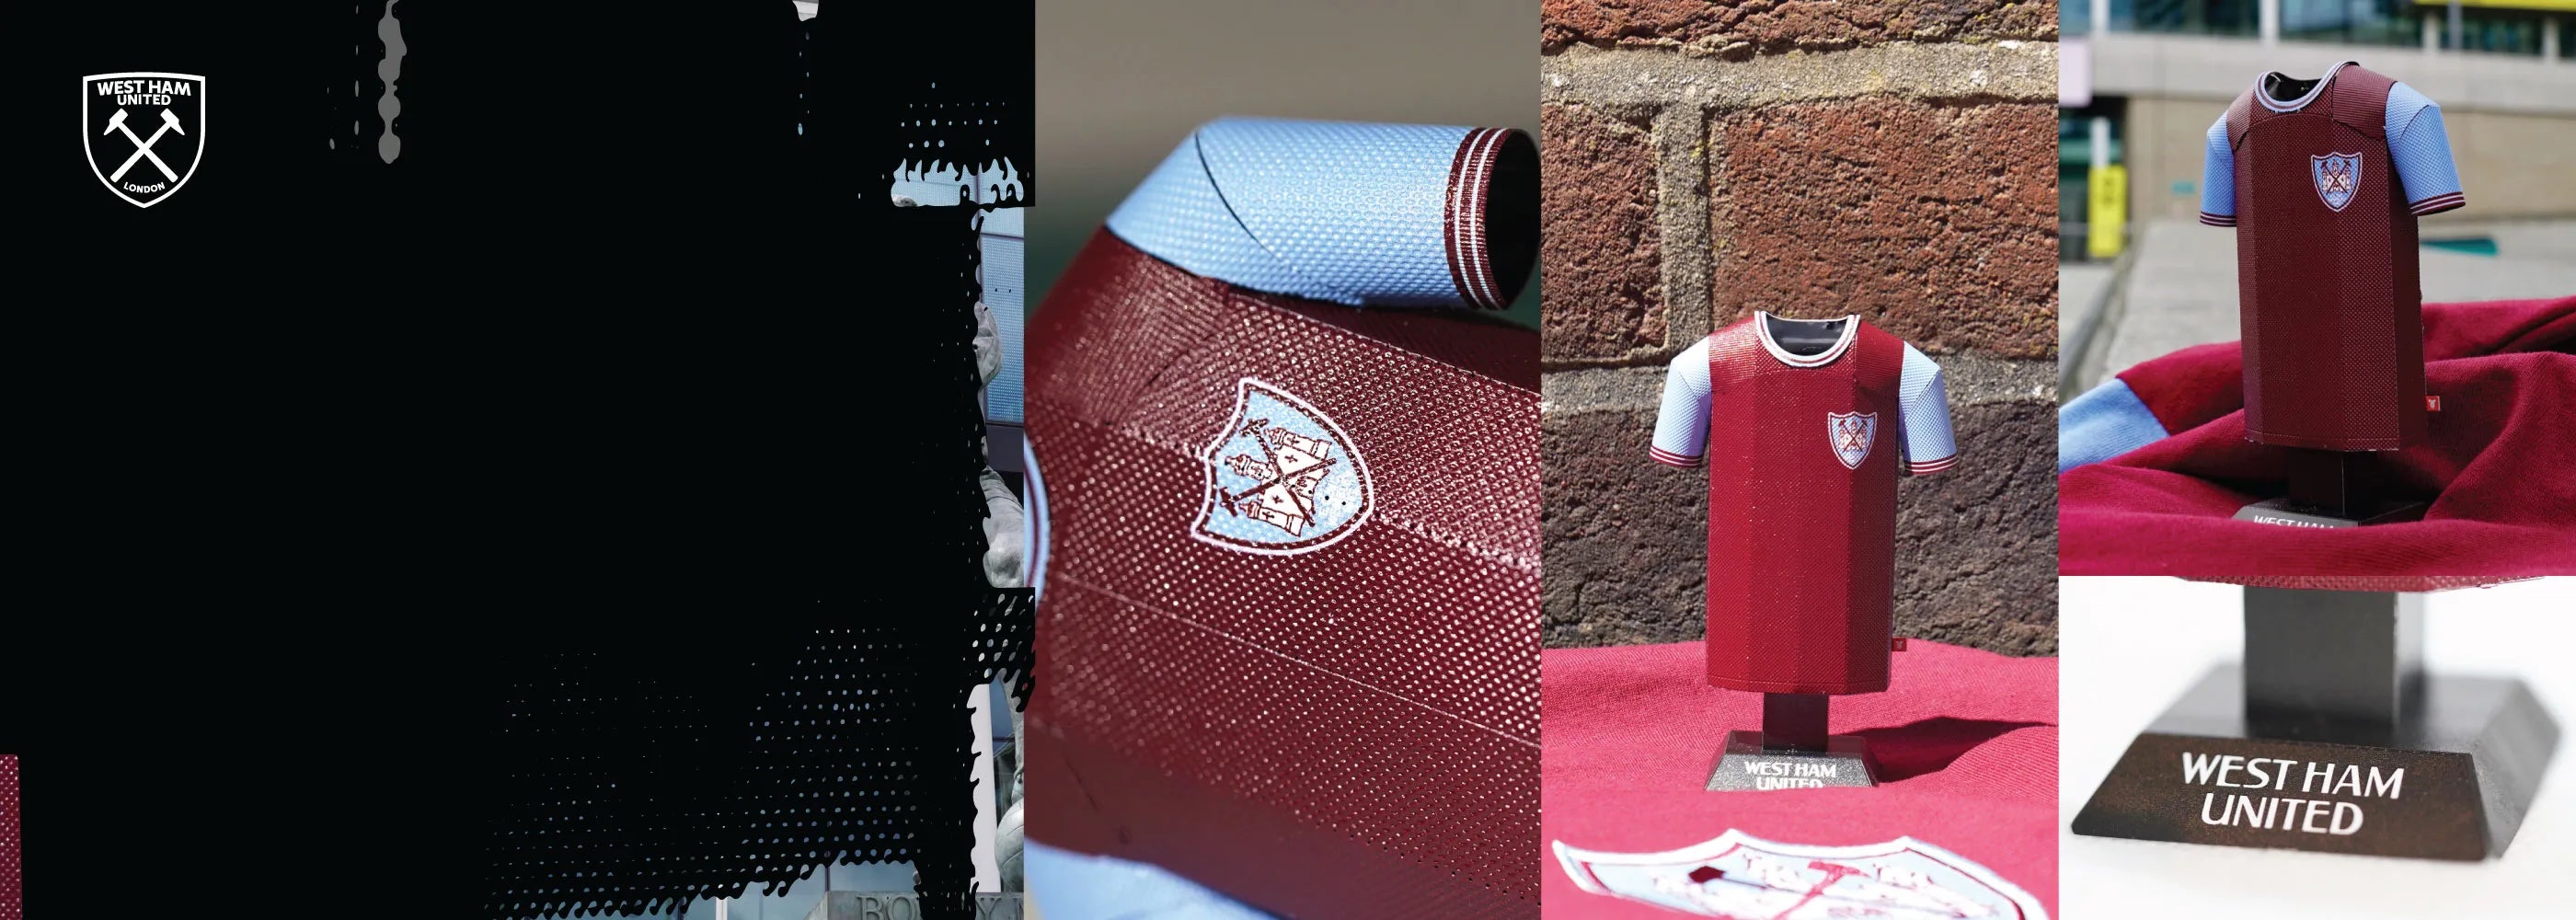 Home page banner with Retro West Ham 1965 Shirt featured as a new launch